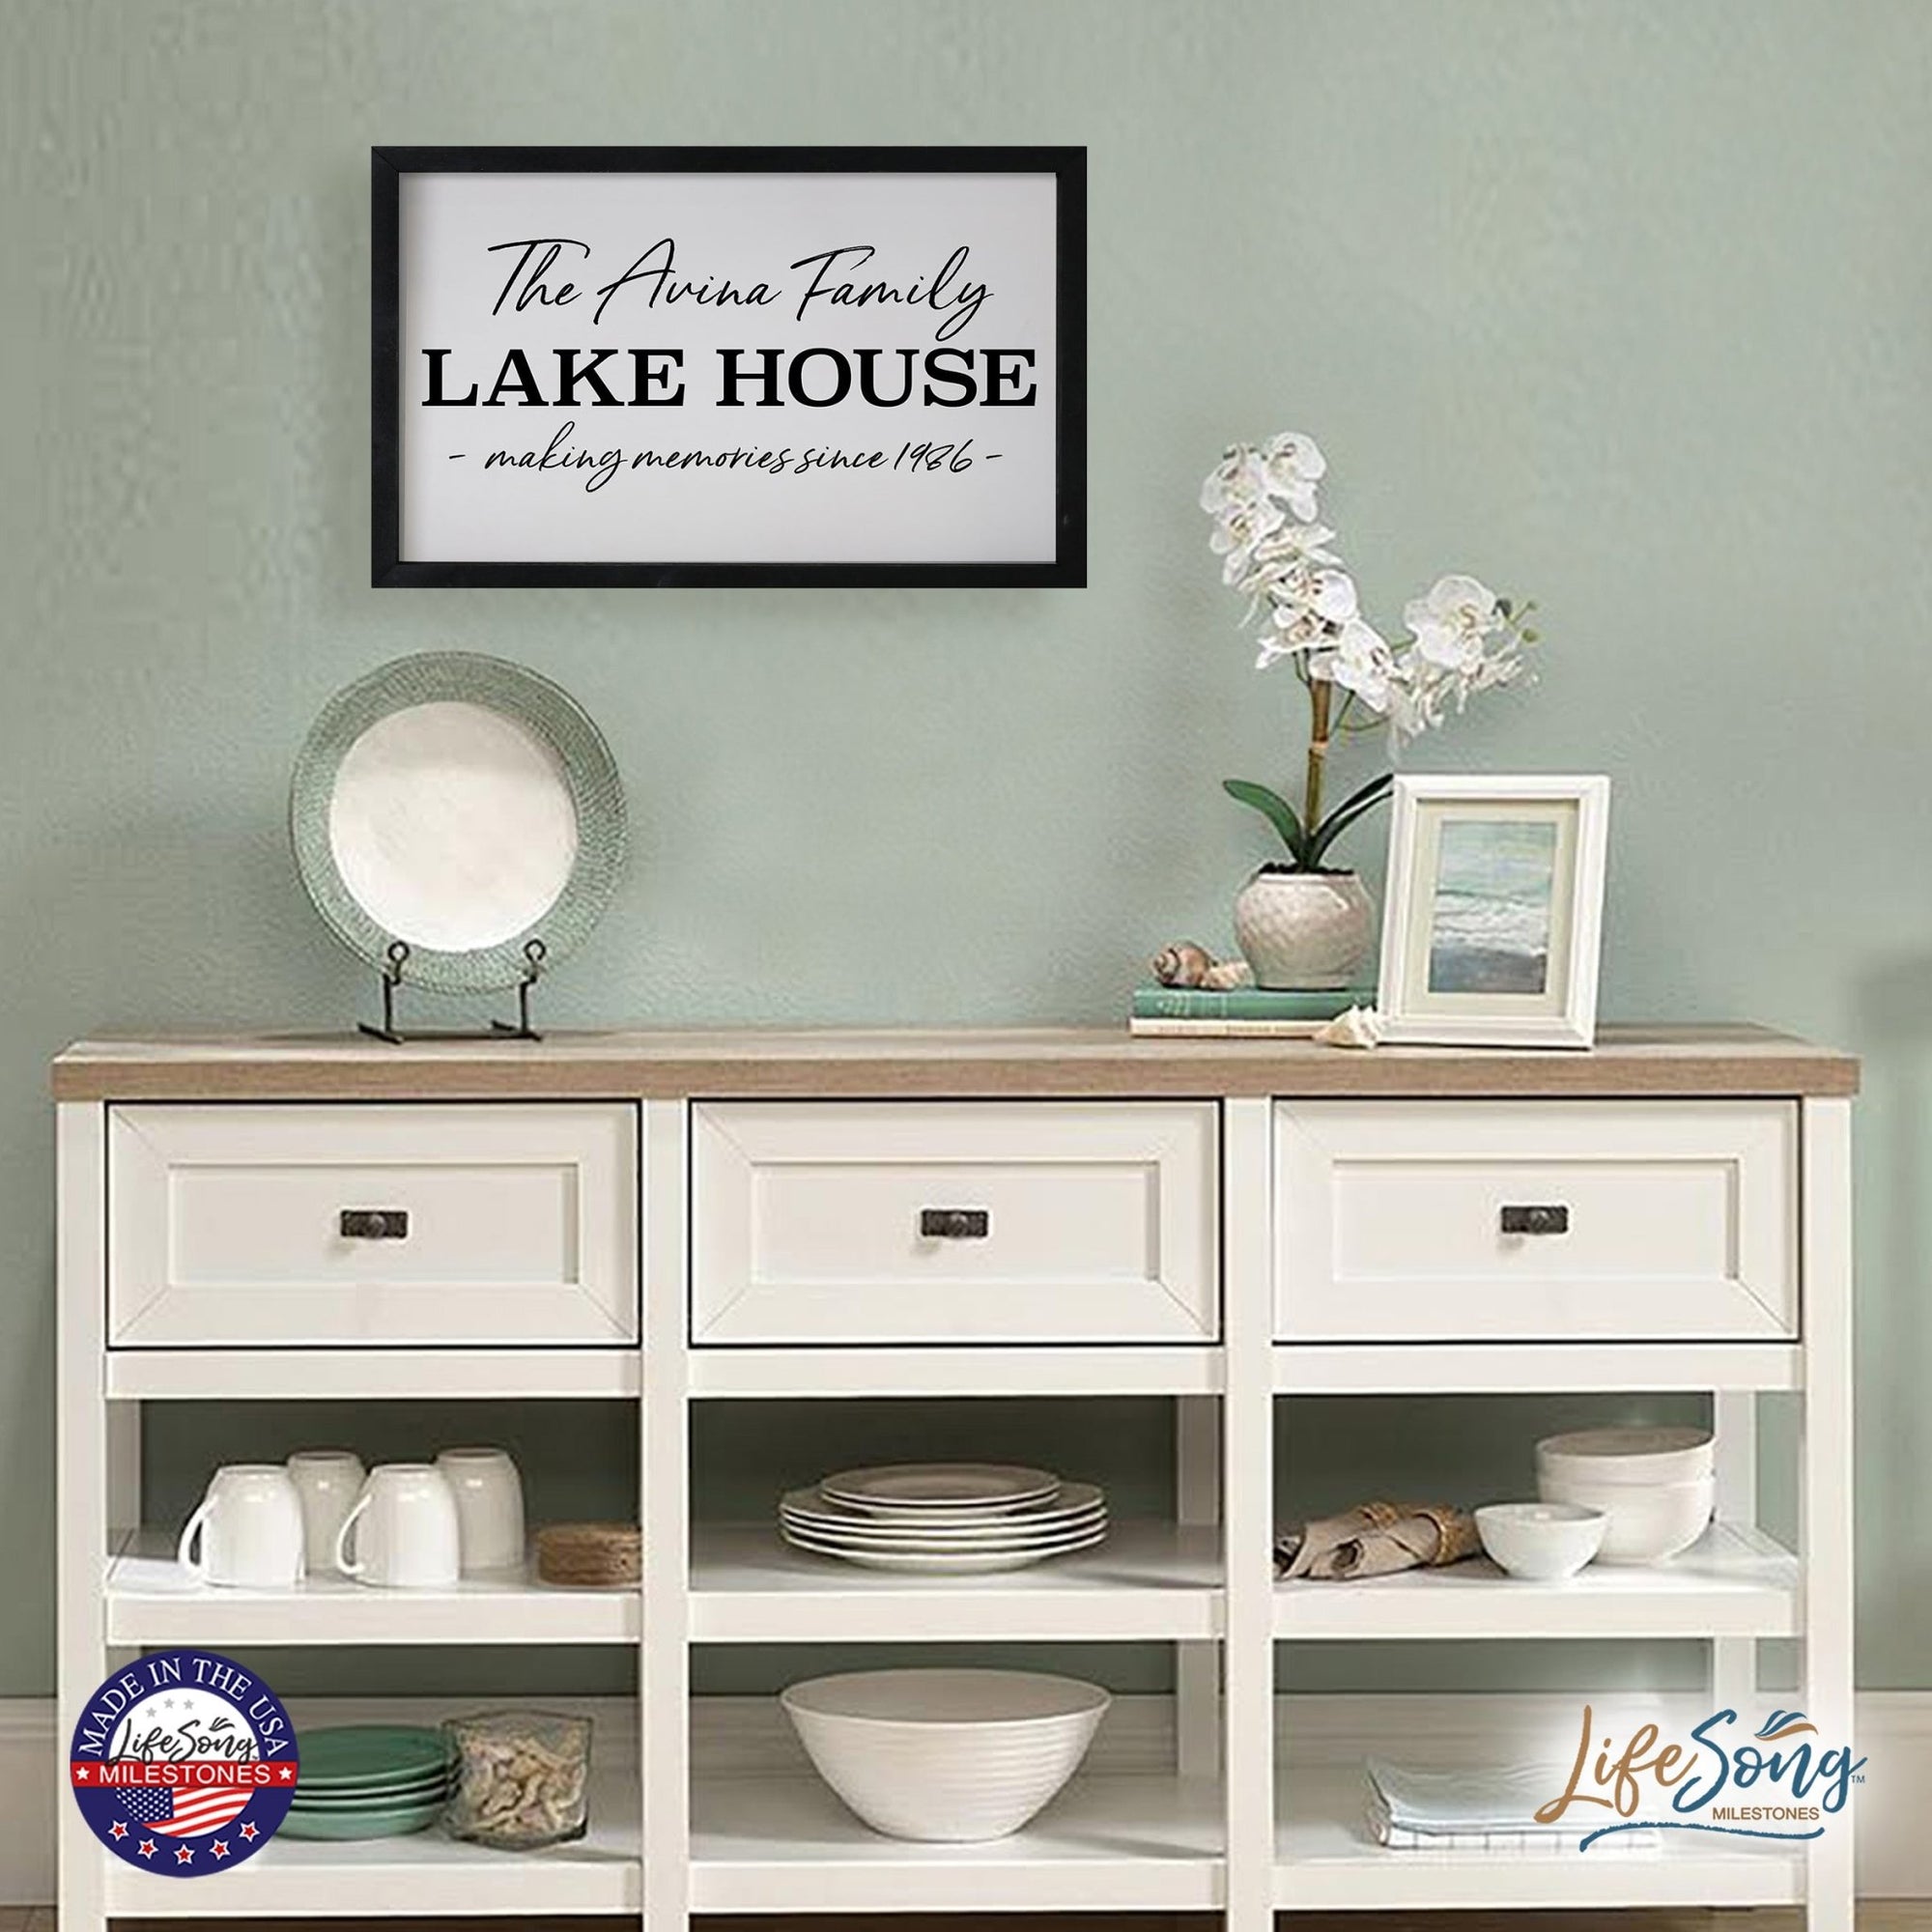 Inspirational Personalized Framed Shadow Box 12x18 - The Lake House Making Memories - LifeSong Milestones